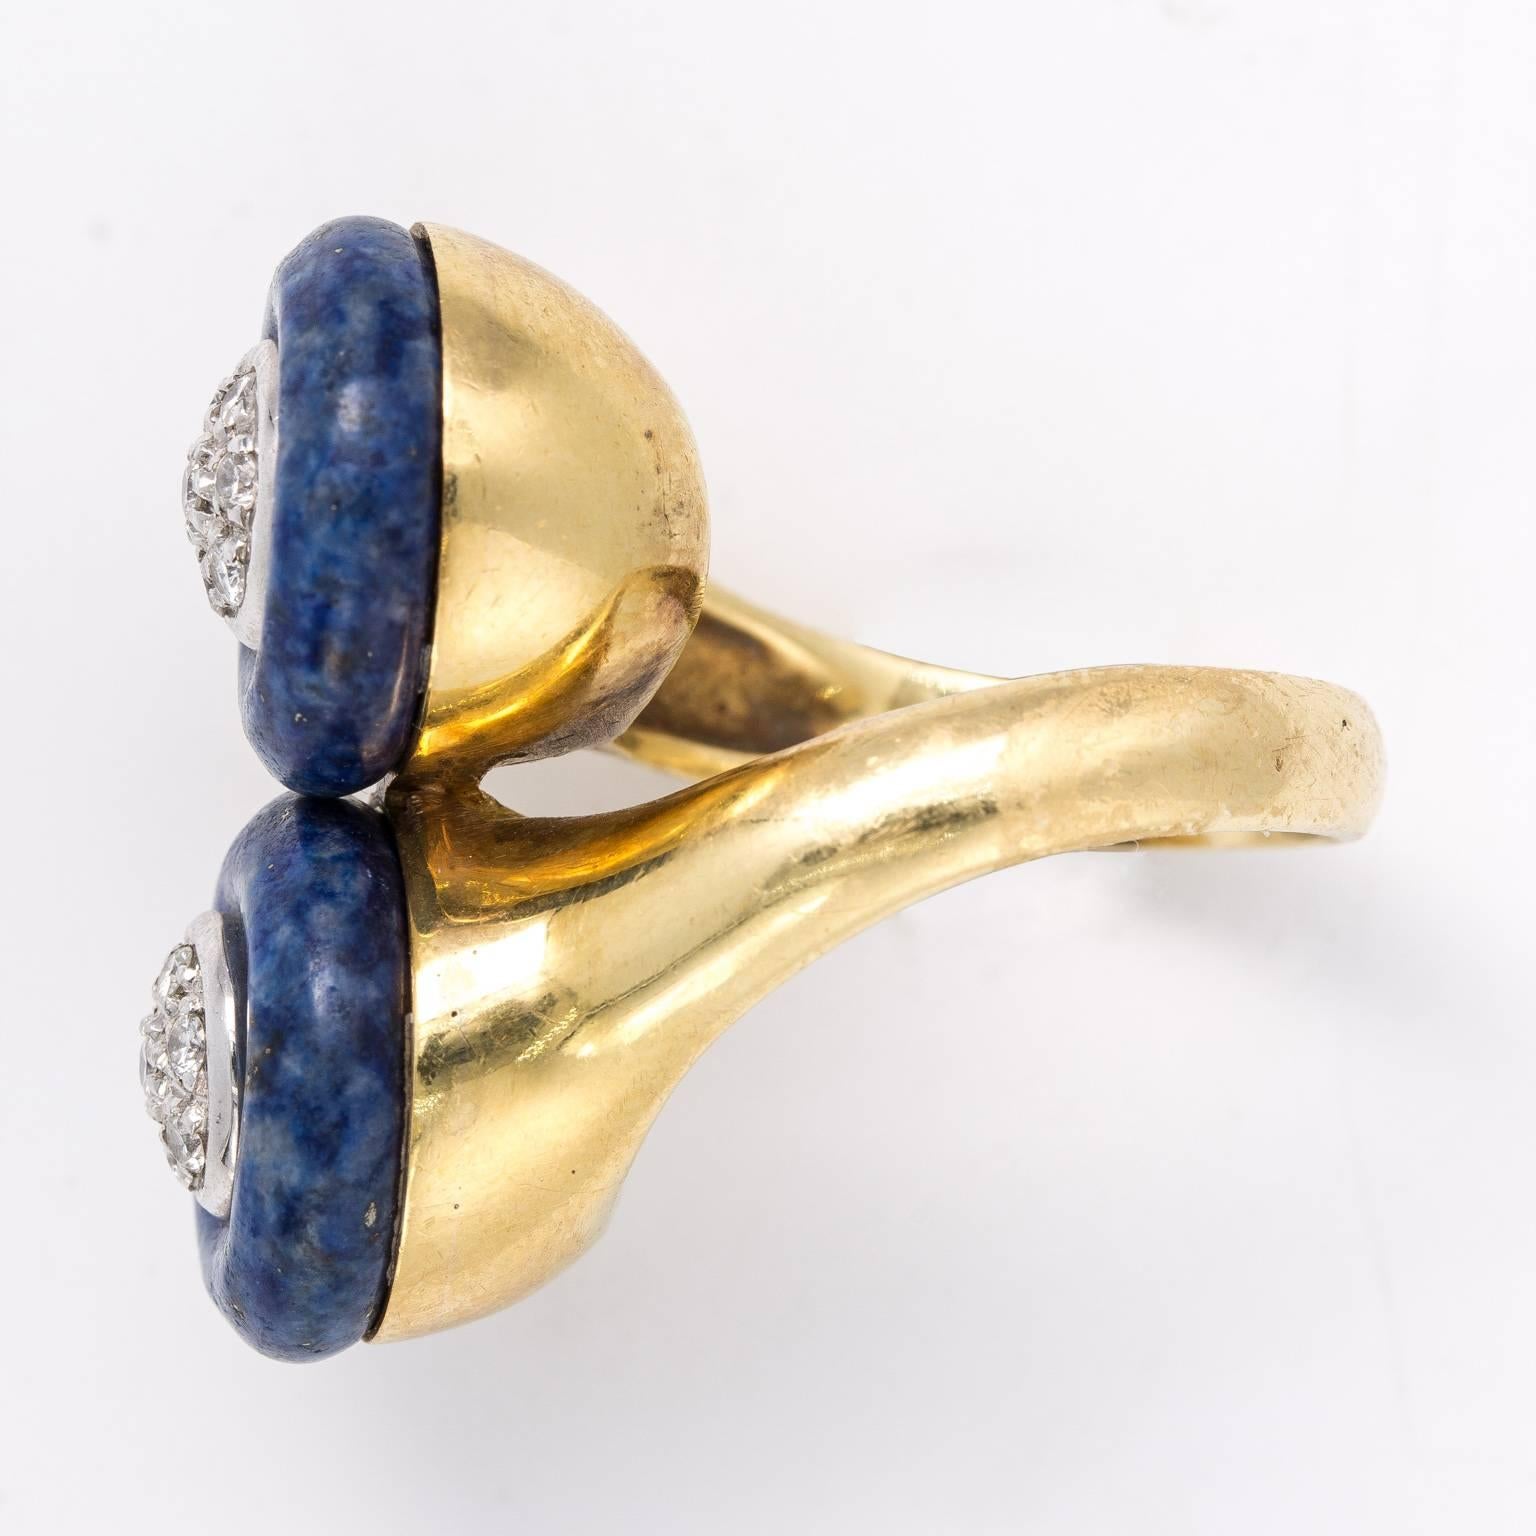 Lapis, 18kt gold and pave diamond ring. Beautifully made. Size 7 and weighs 14.80 grams